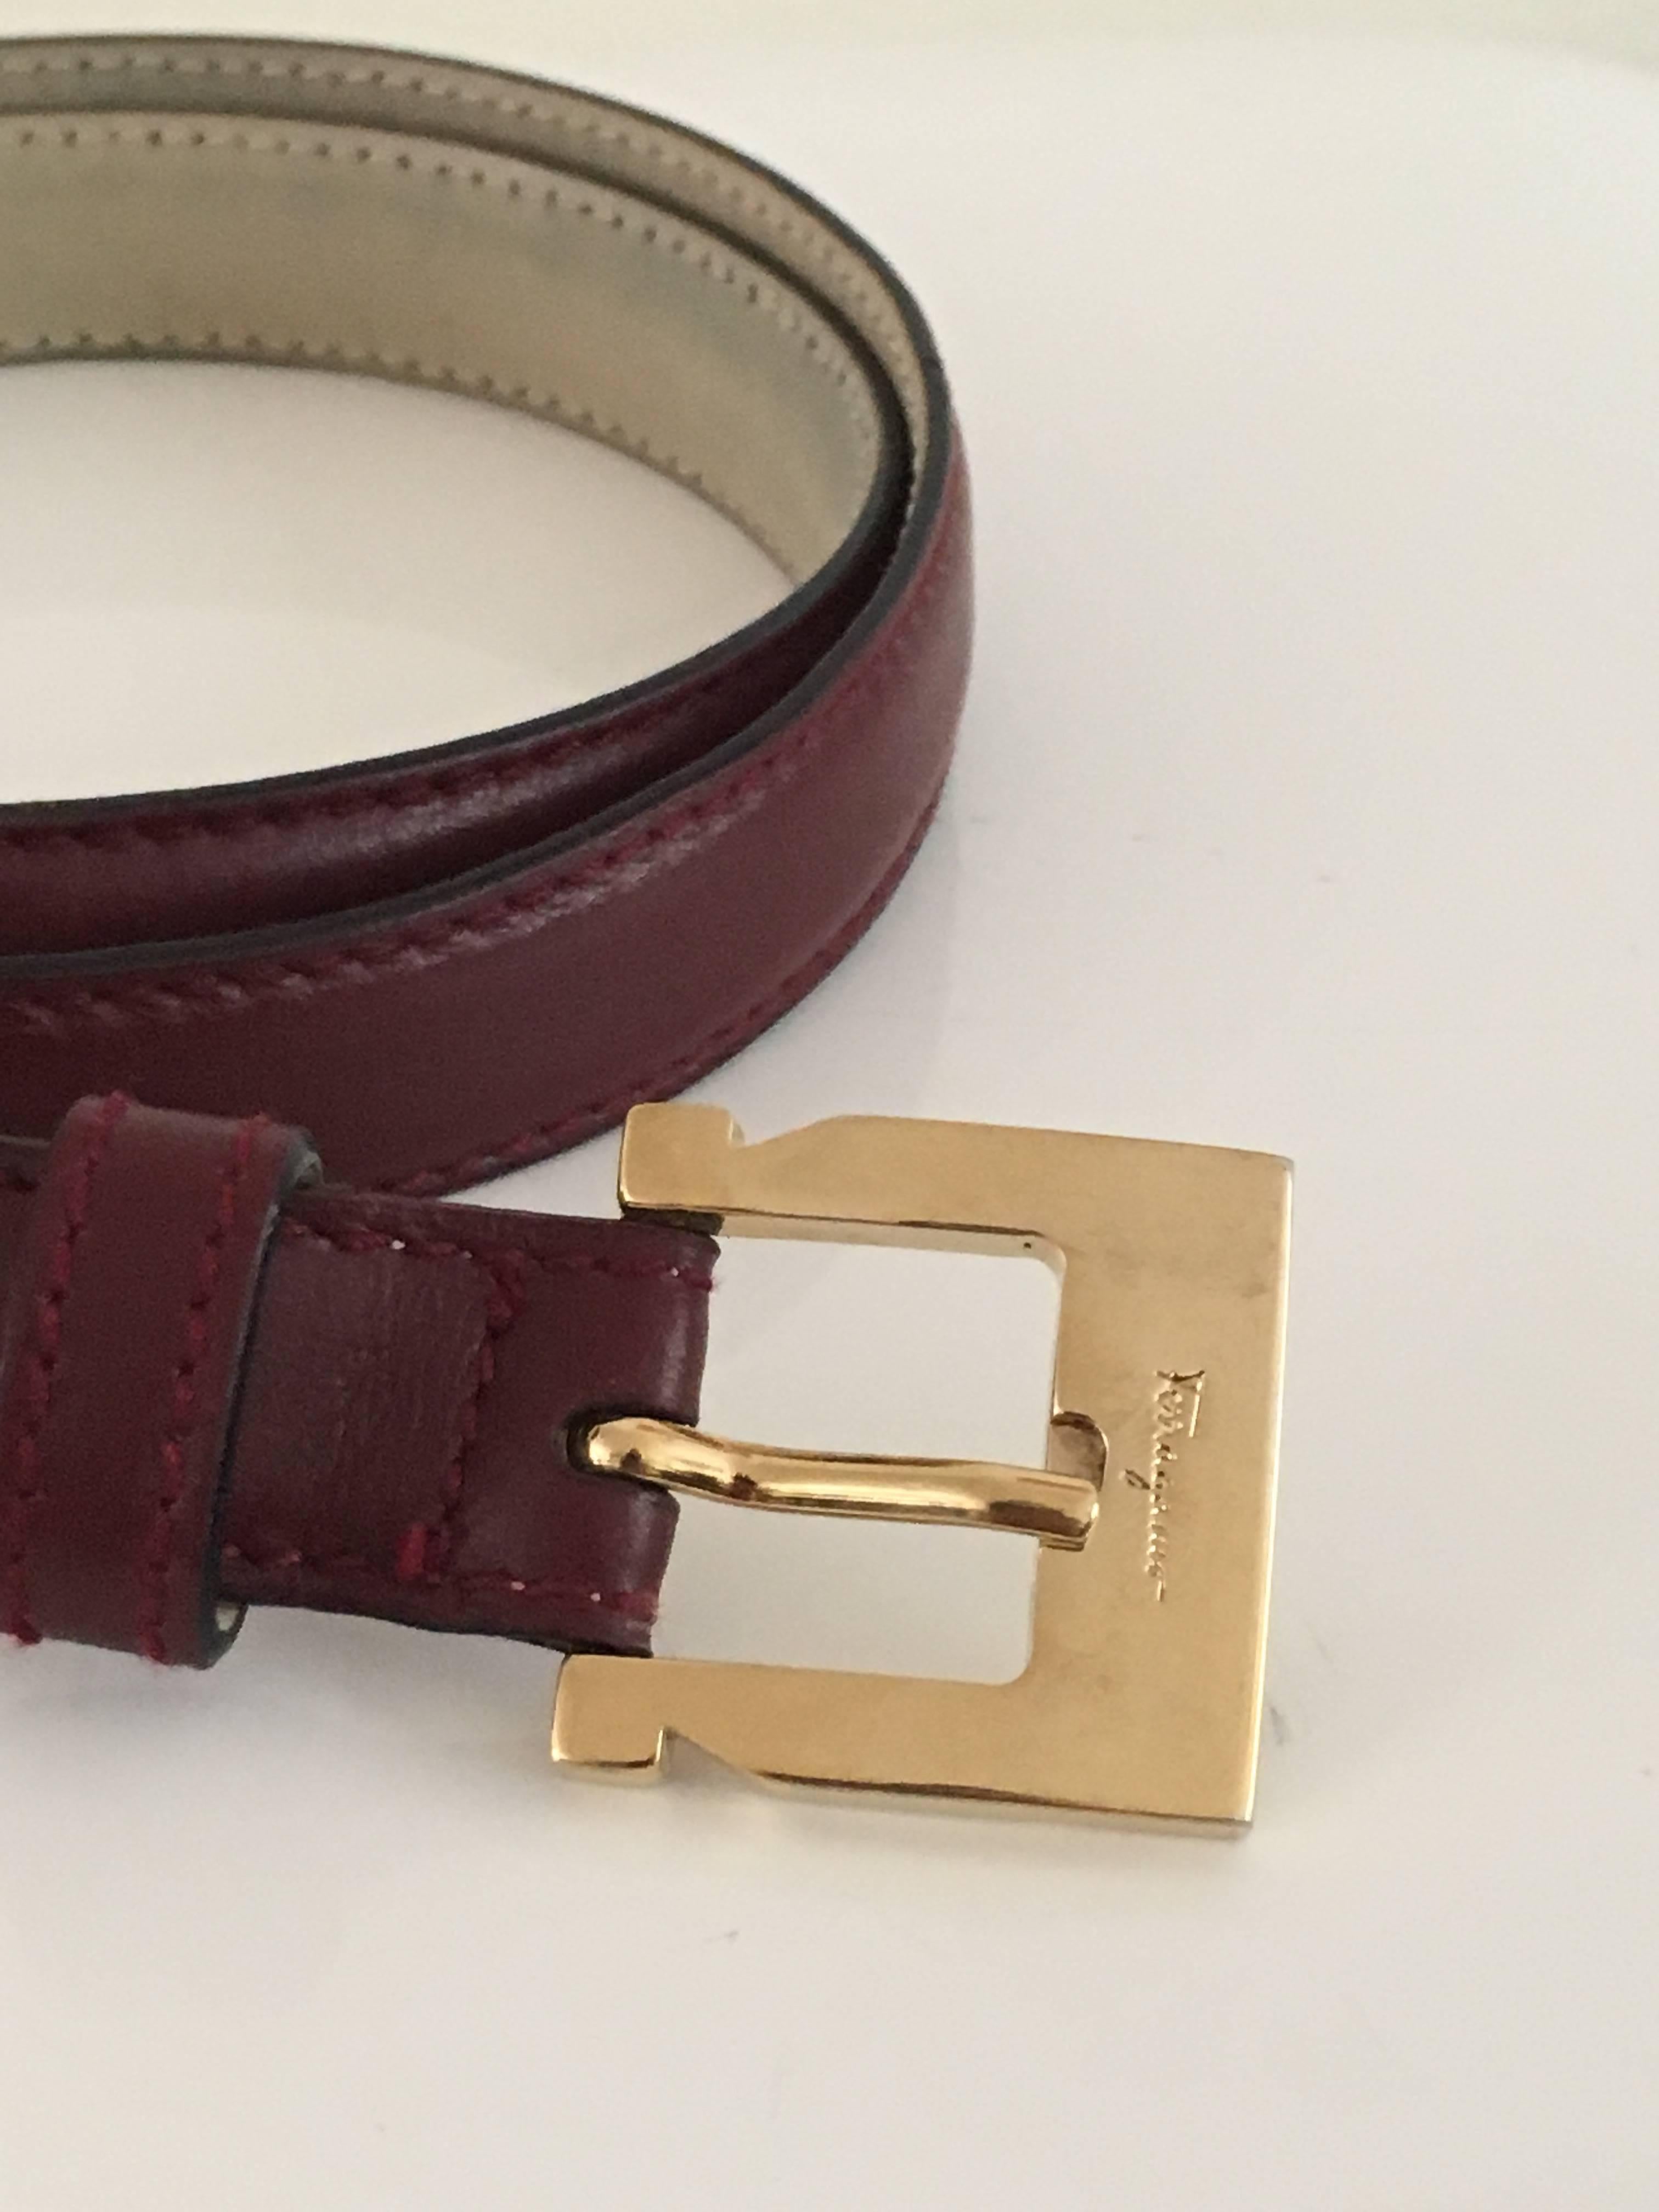 Ferragamo burgundy leather with brass buckle belt is a size medium.
Measurements are:
Buckle:
1. 1/4